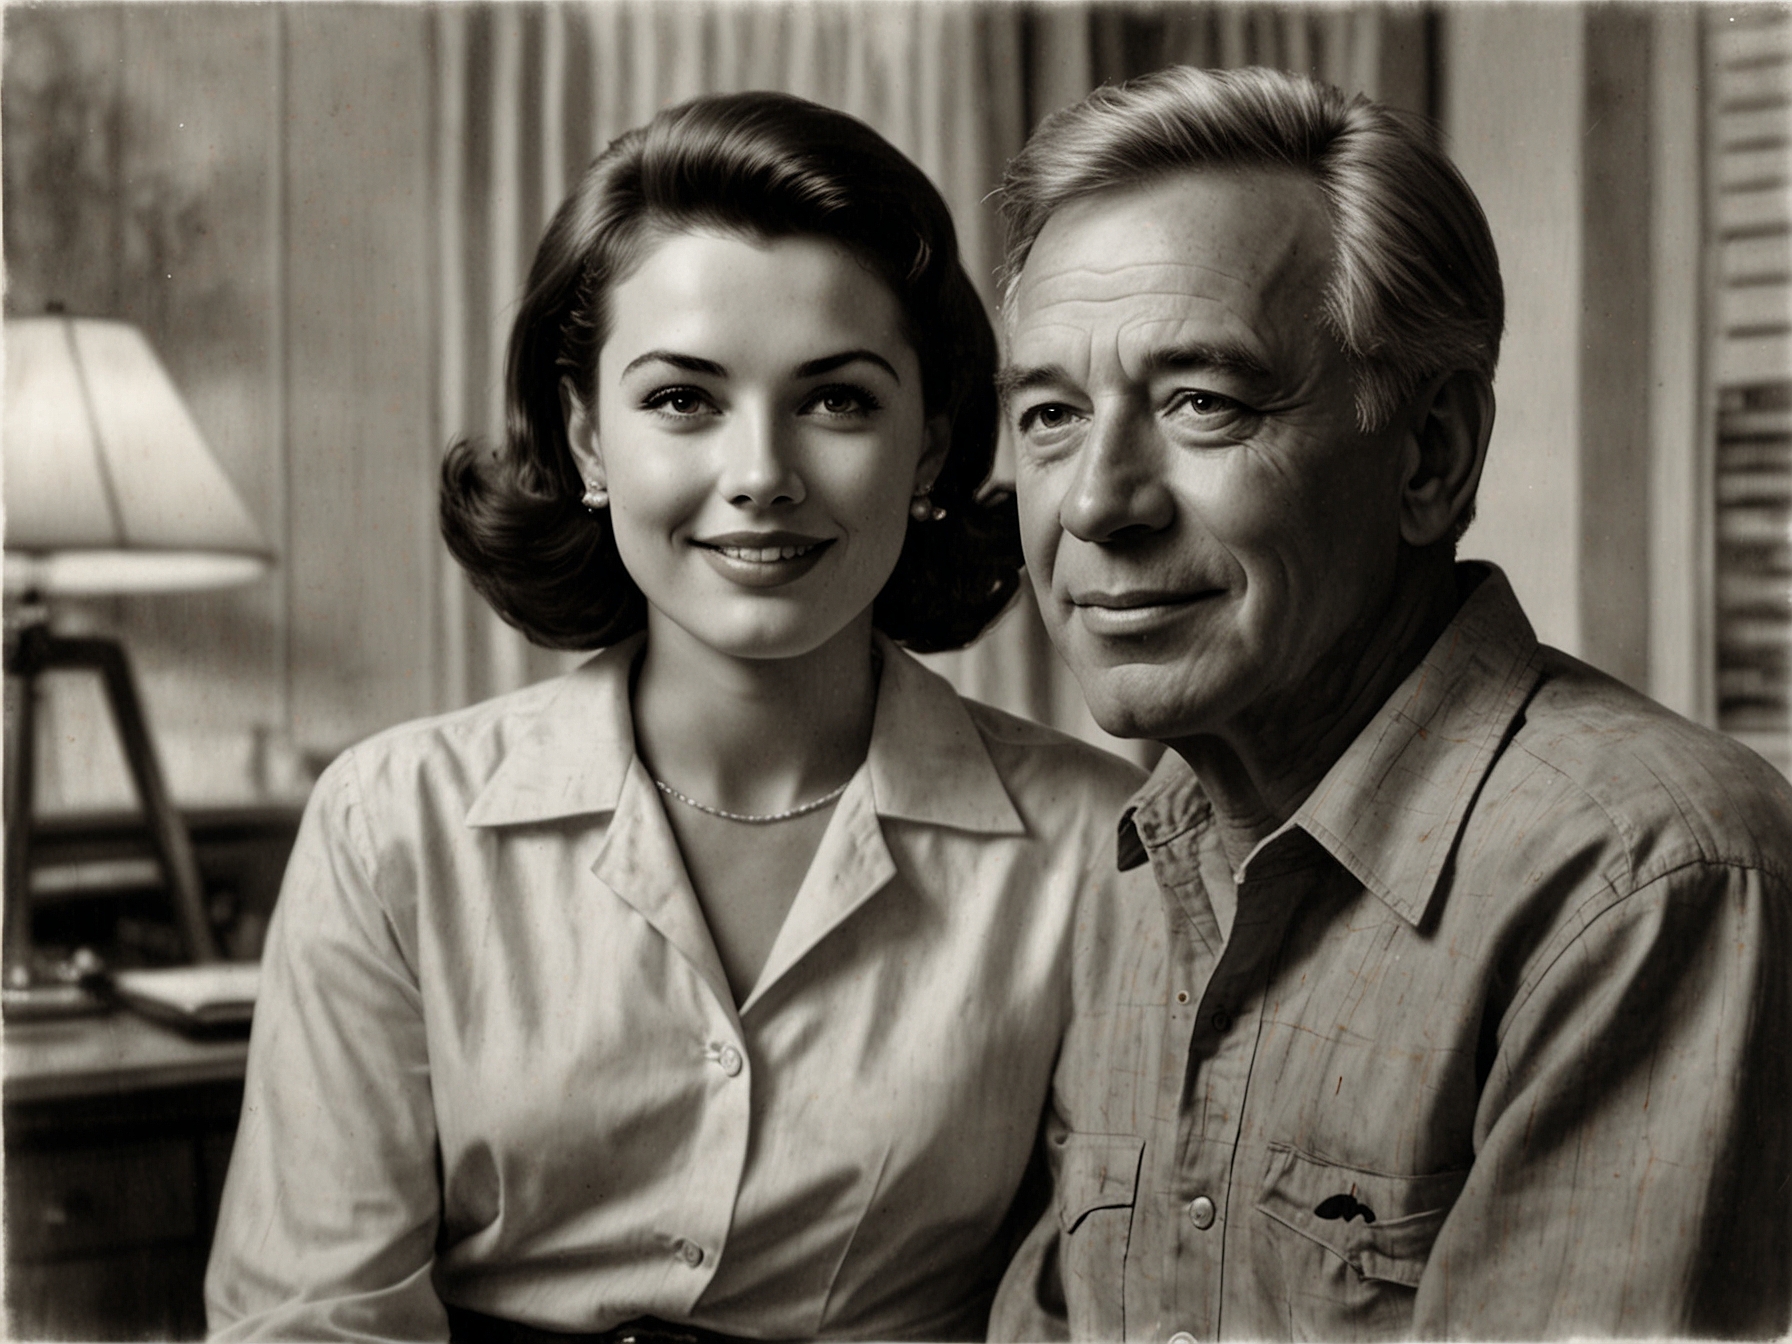 A candid photo of Evans Evans with her husband, director John Frankenheimer, reflecting their personal and professional partnership in the film industry.